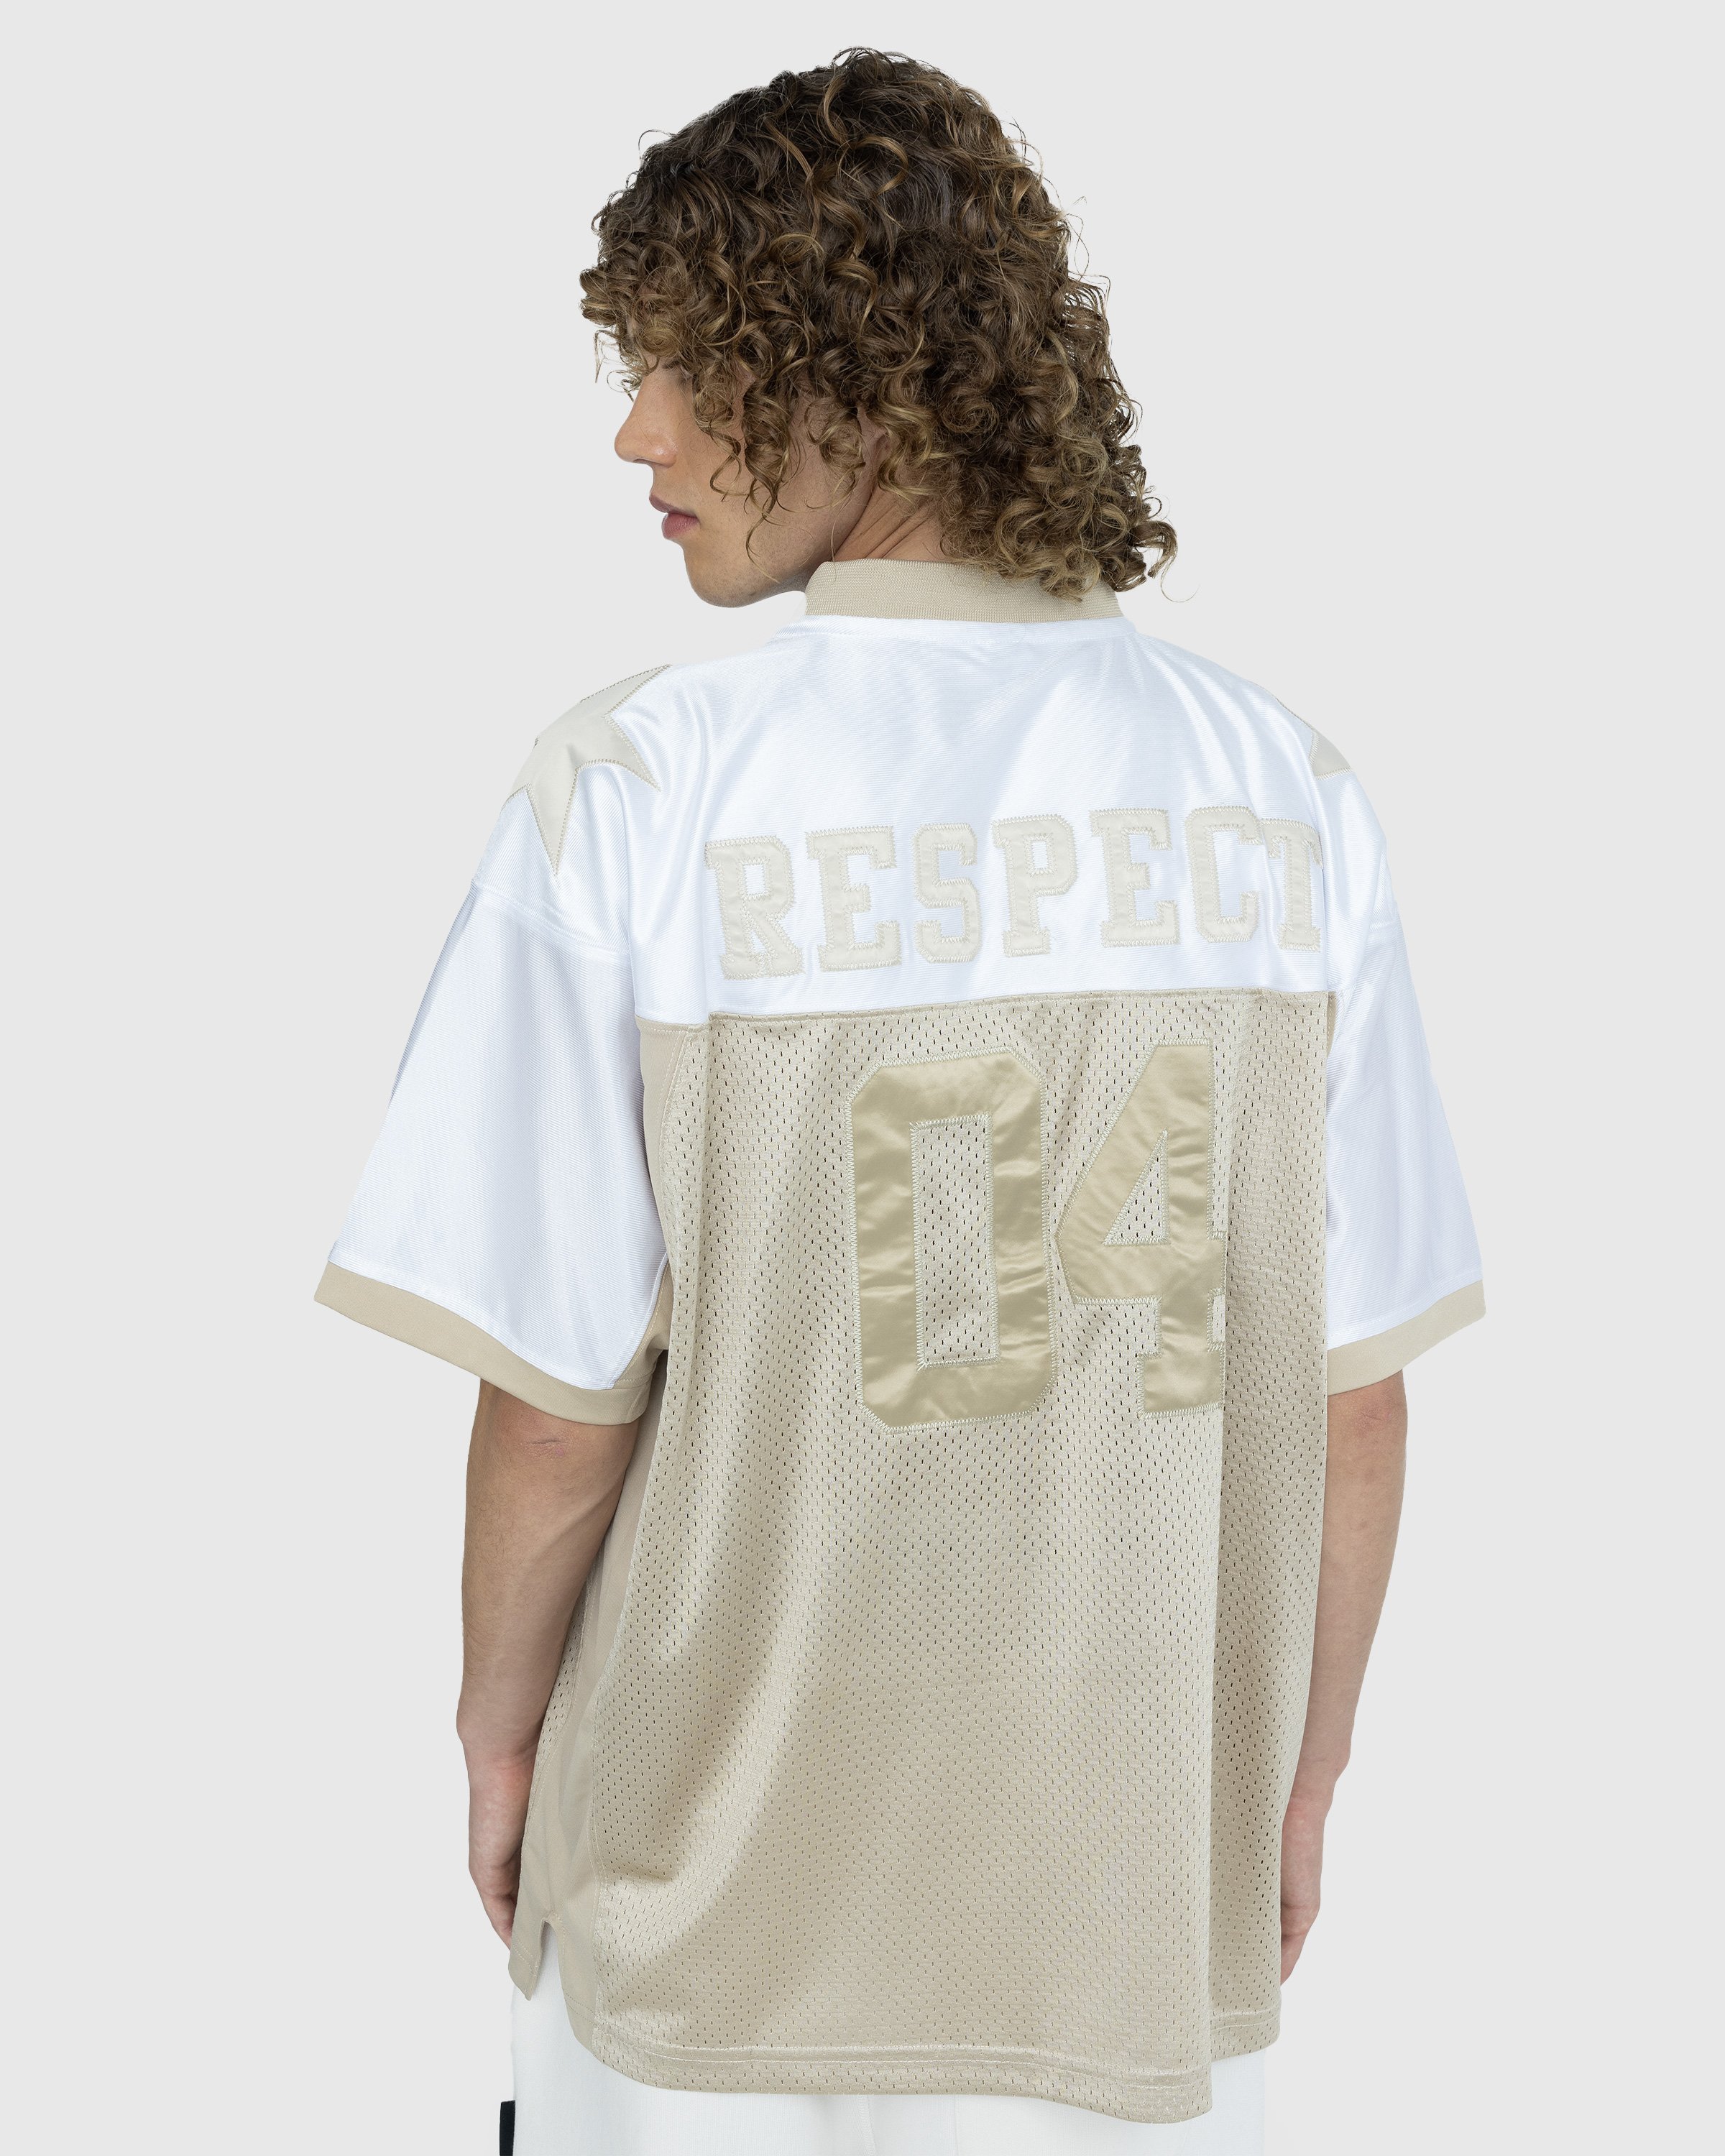 Patta - Respect Football Jersey Cement/White - Clothing - White - Image 3